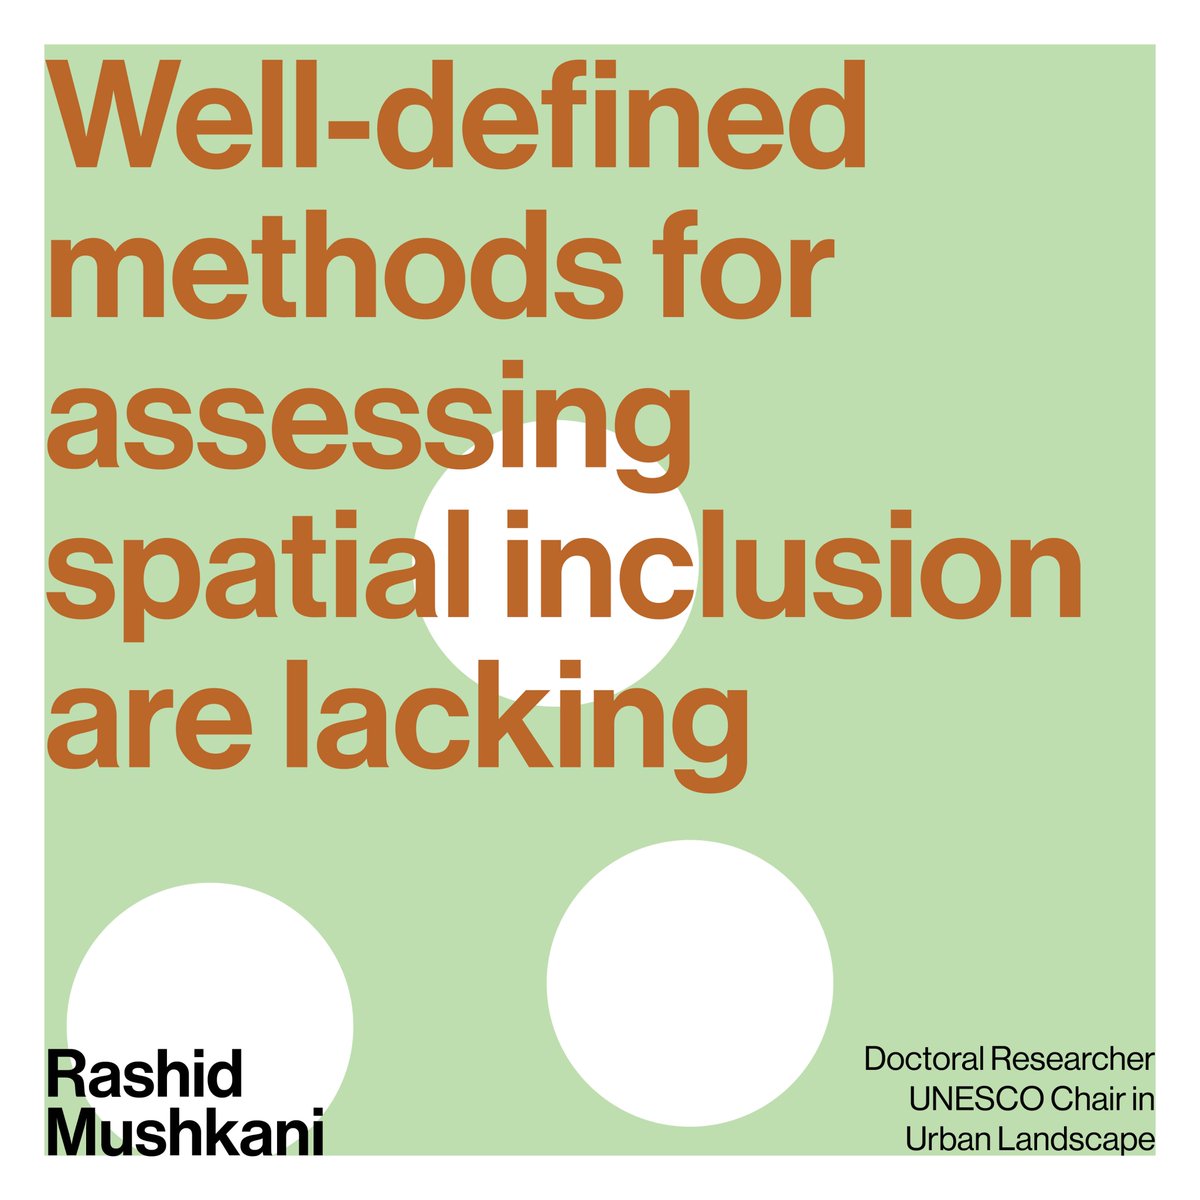 💡On studying spatial inclusion by Rashid Mushkani, PhD student and researcher at the @unesco_studio #urbanresearch #publicspace #inclusion